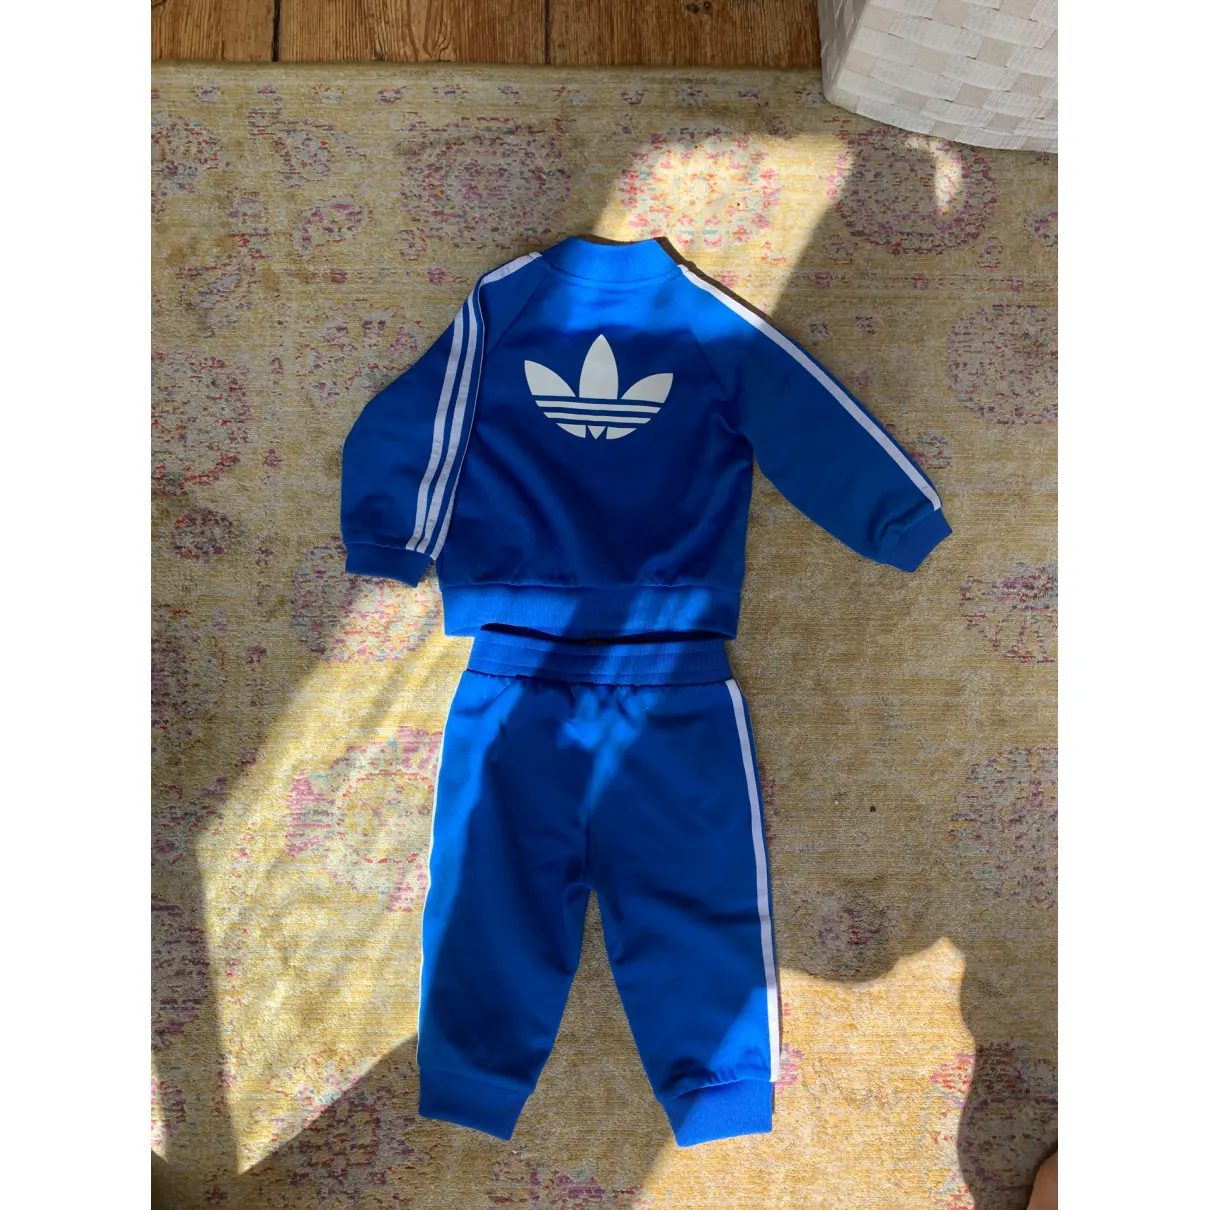 Buy Adidas Outfit online